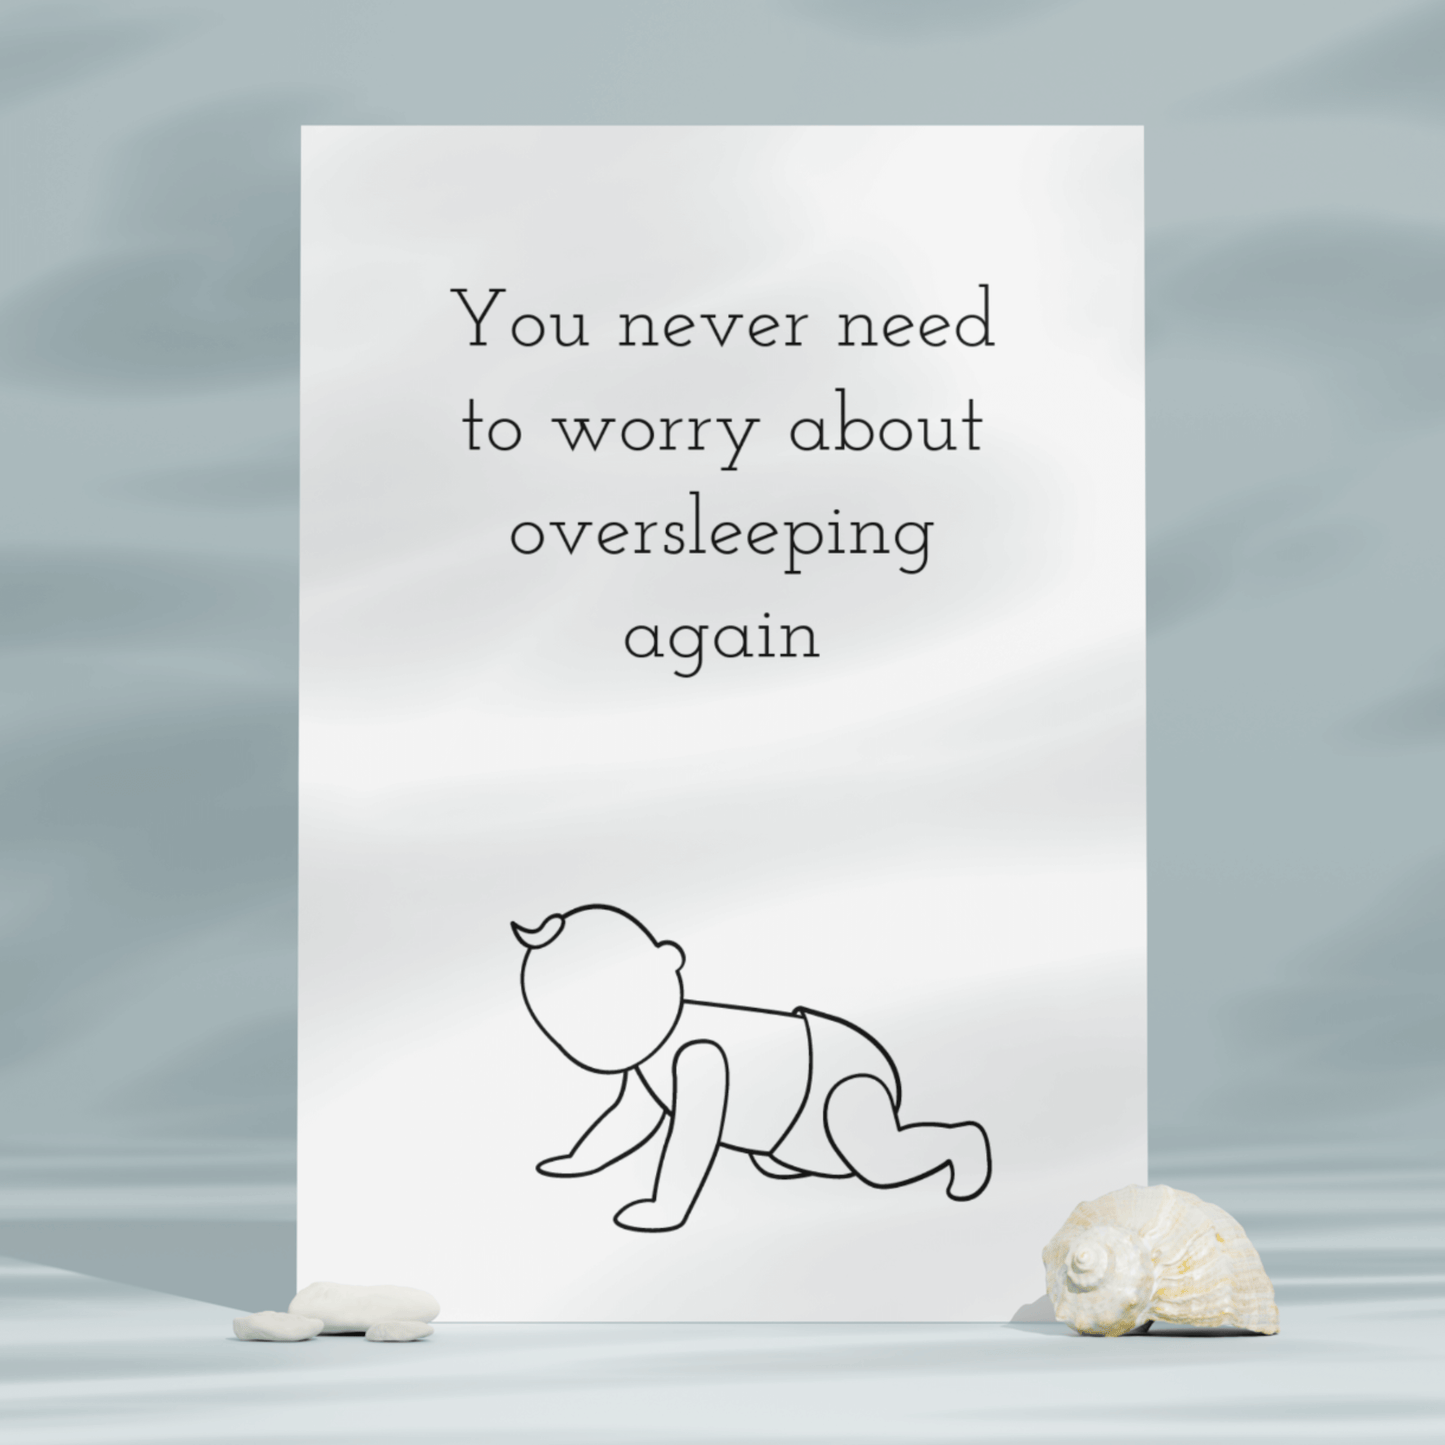 Little Kraken's Never Need to Worry About Oversleeping, New Baby Cards for £3.50 each